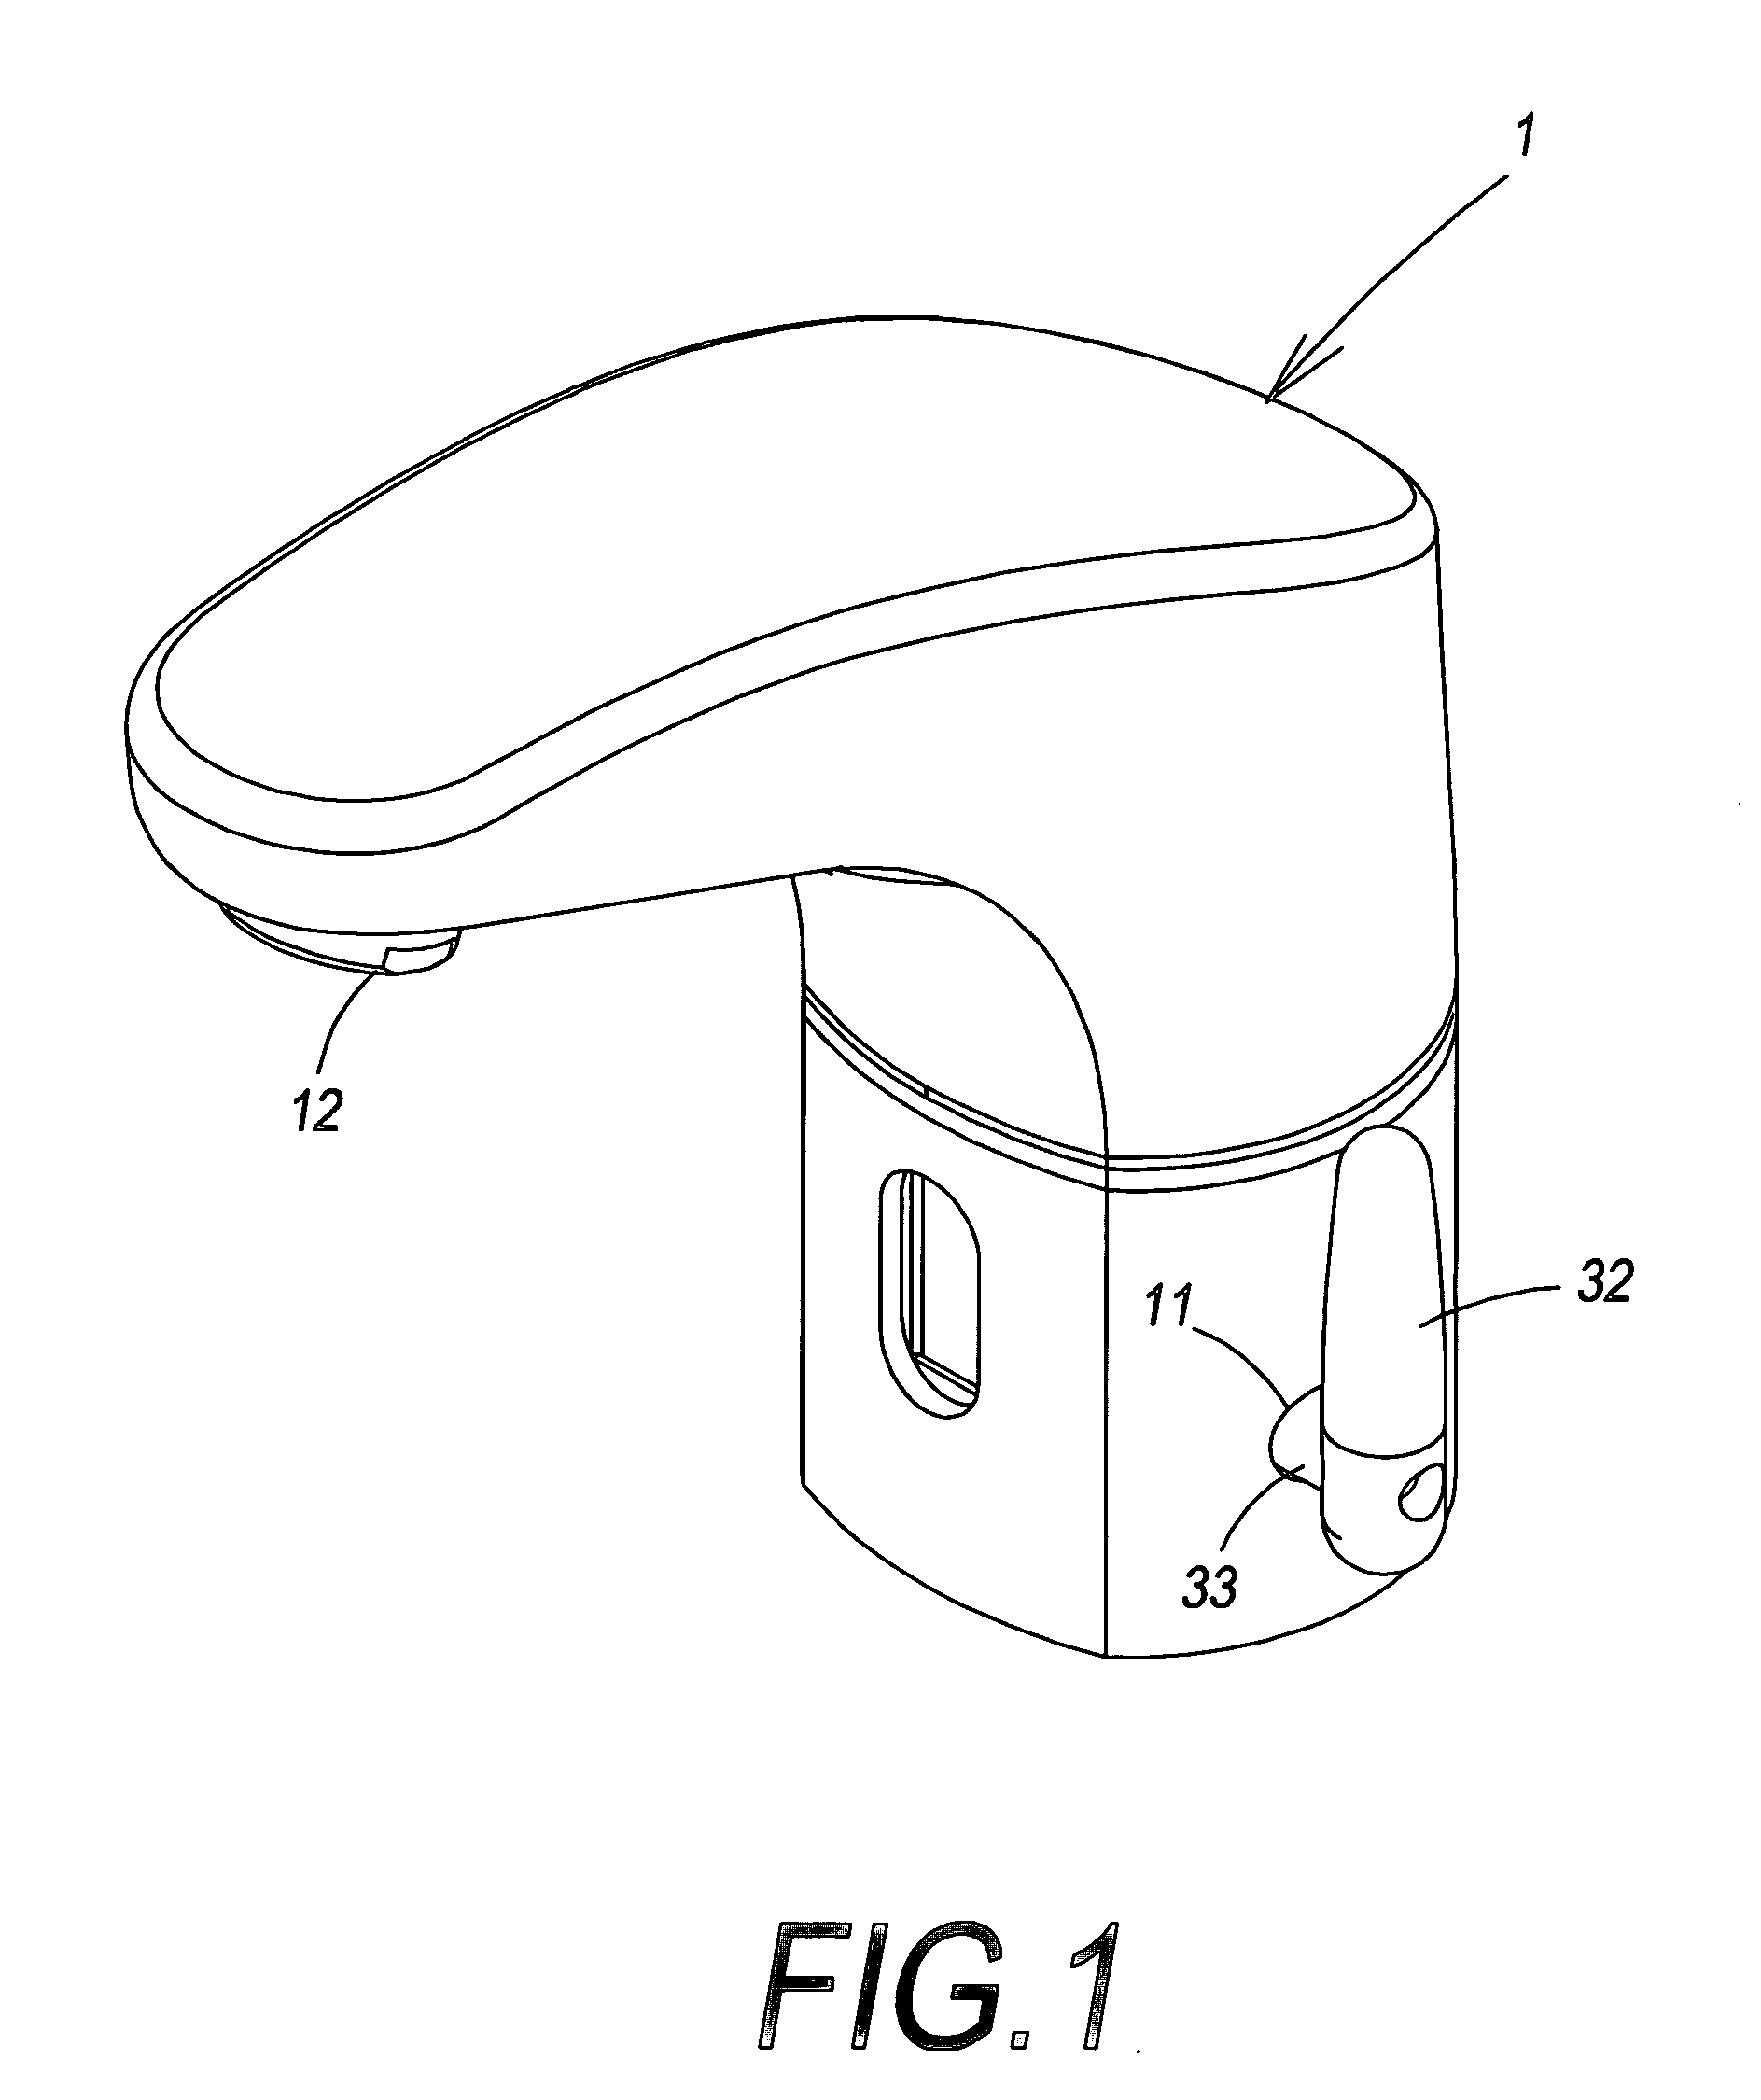 Detent apparatus for water temperature regulation of induction faucets